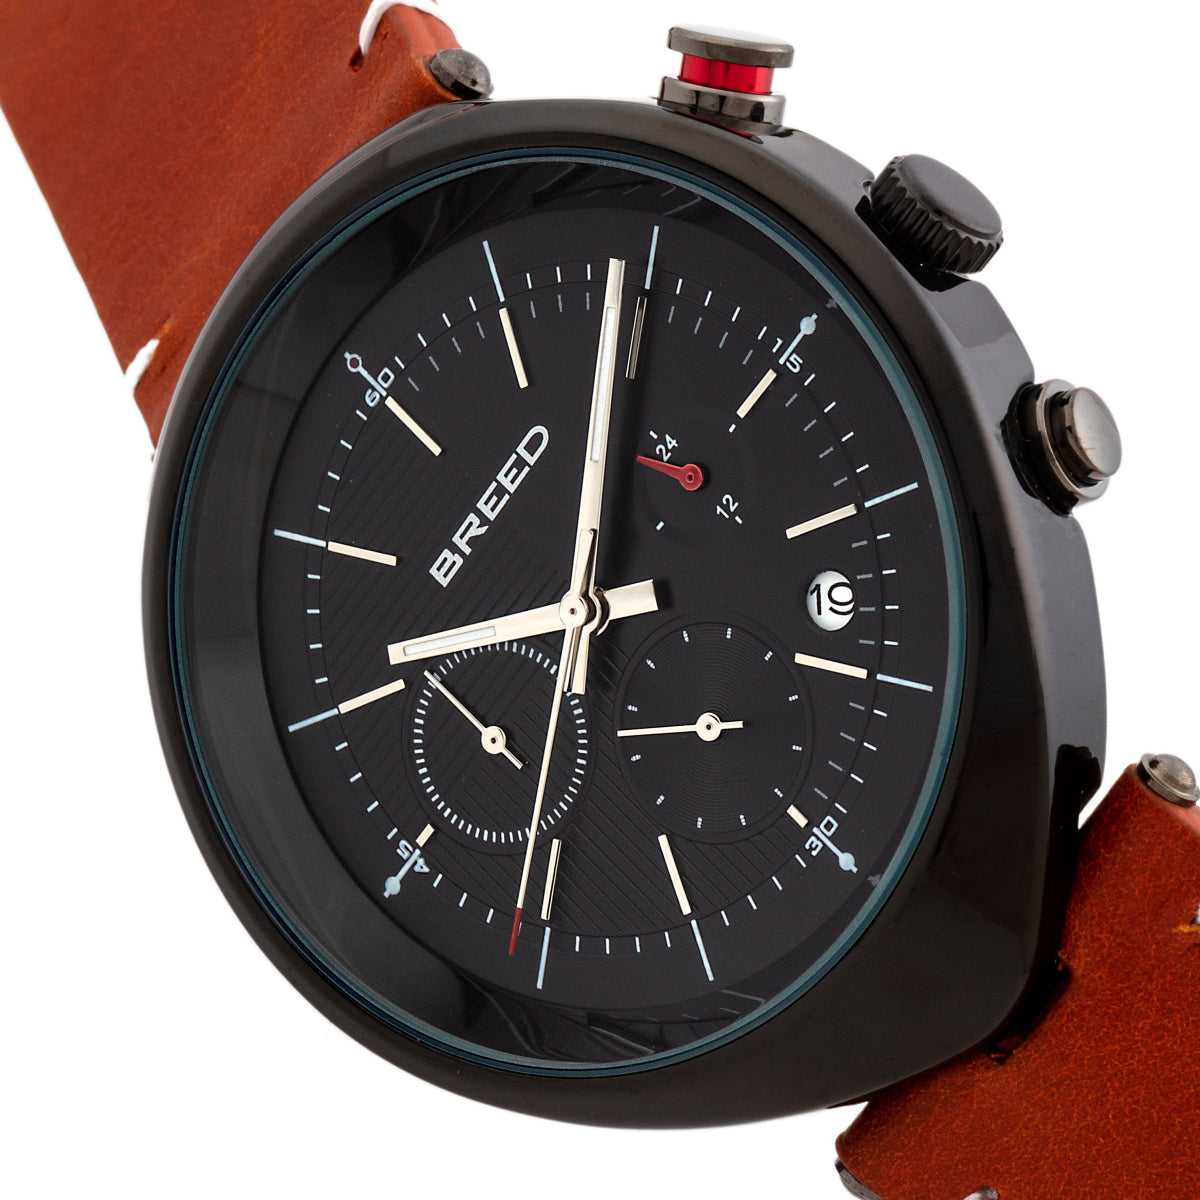 Breed Tempest Chronograph Leather-Band Watch w/Date - Brown/Black - BRD8606